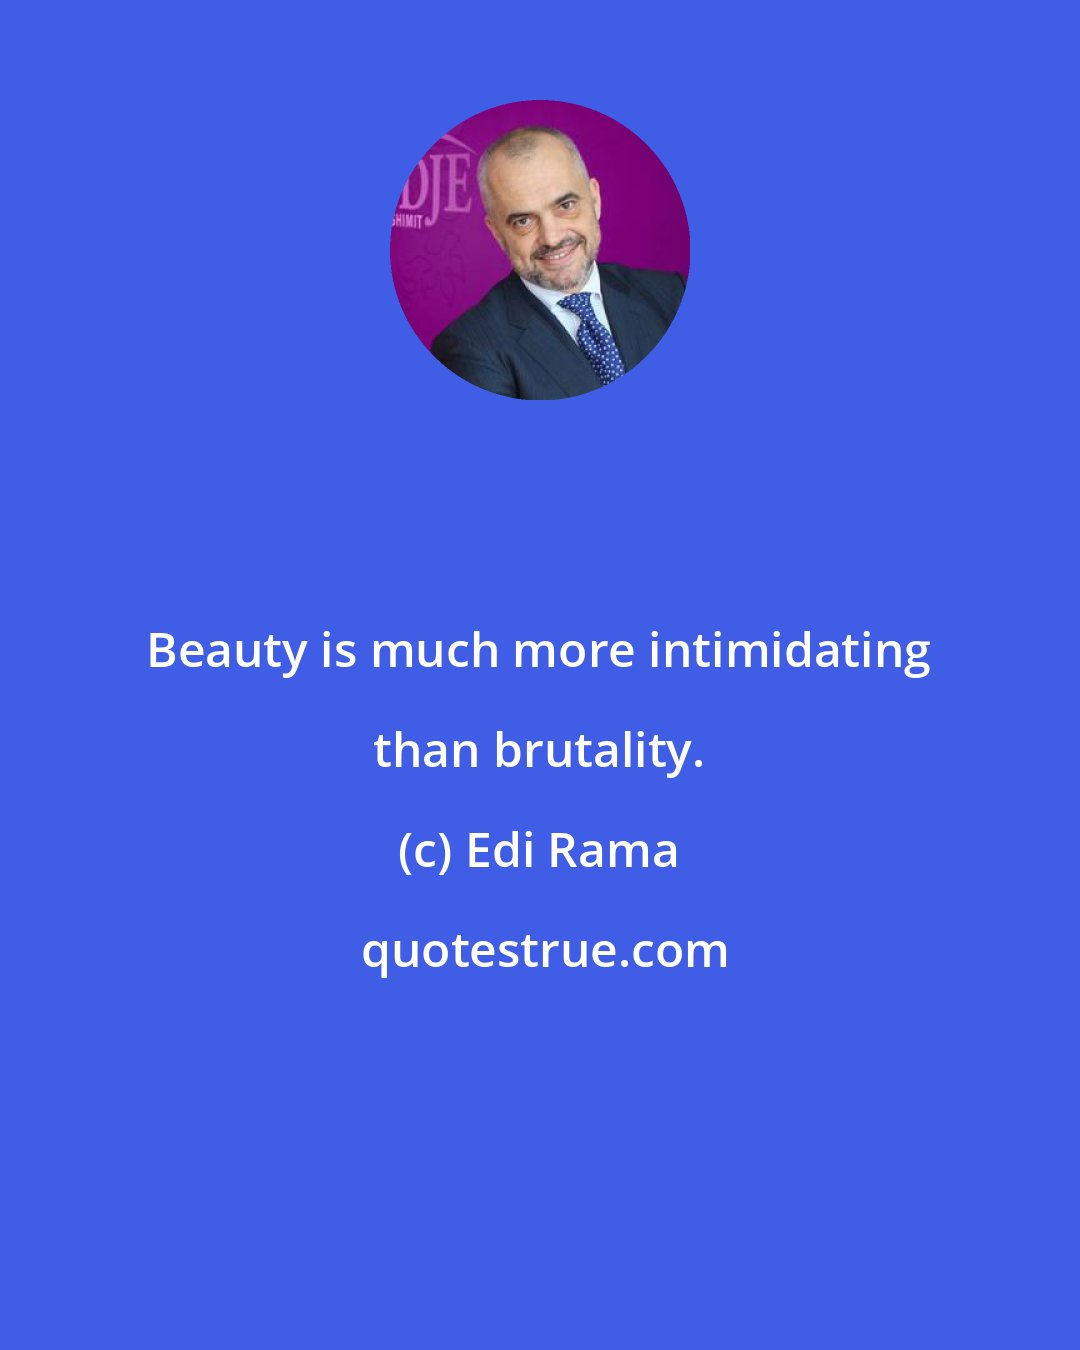 Edi Rama: Beauty is much more intimidating than brutality.